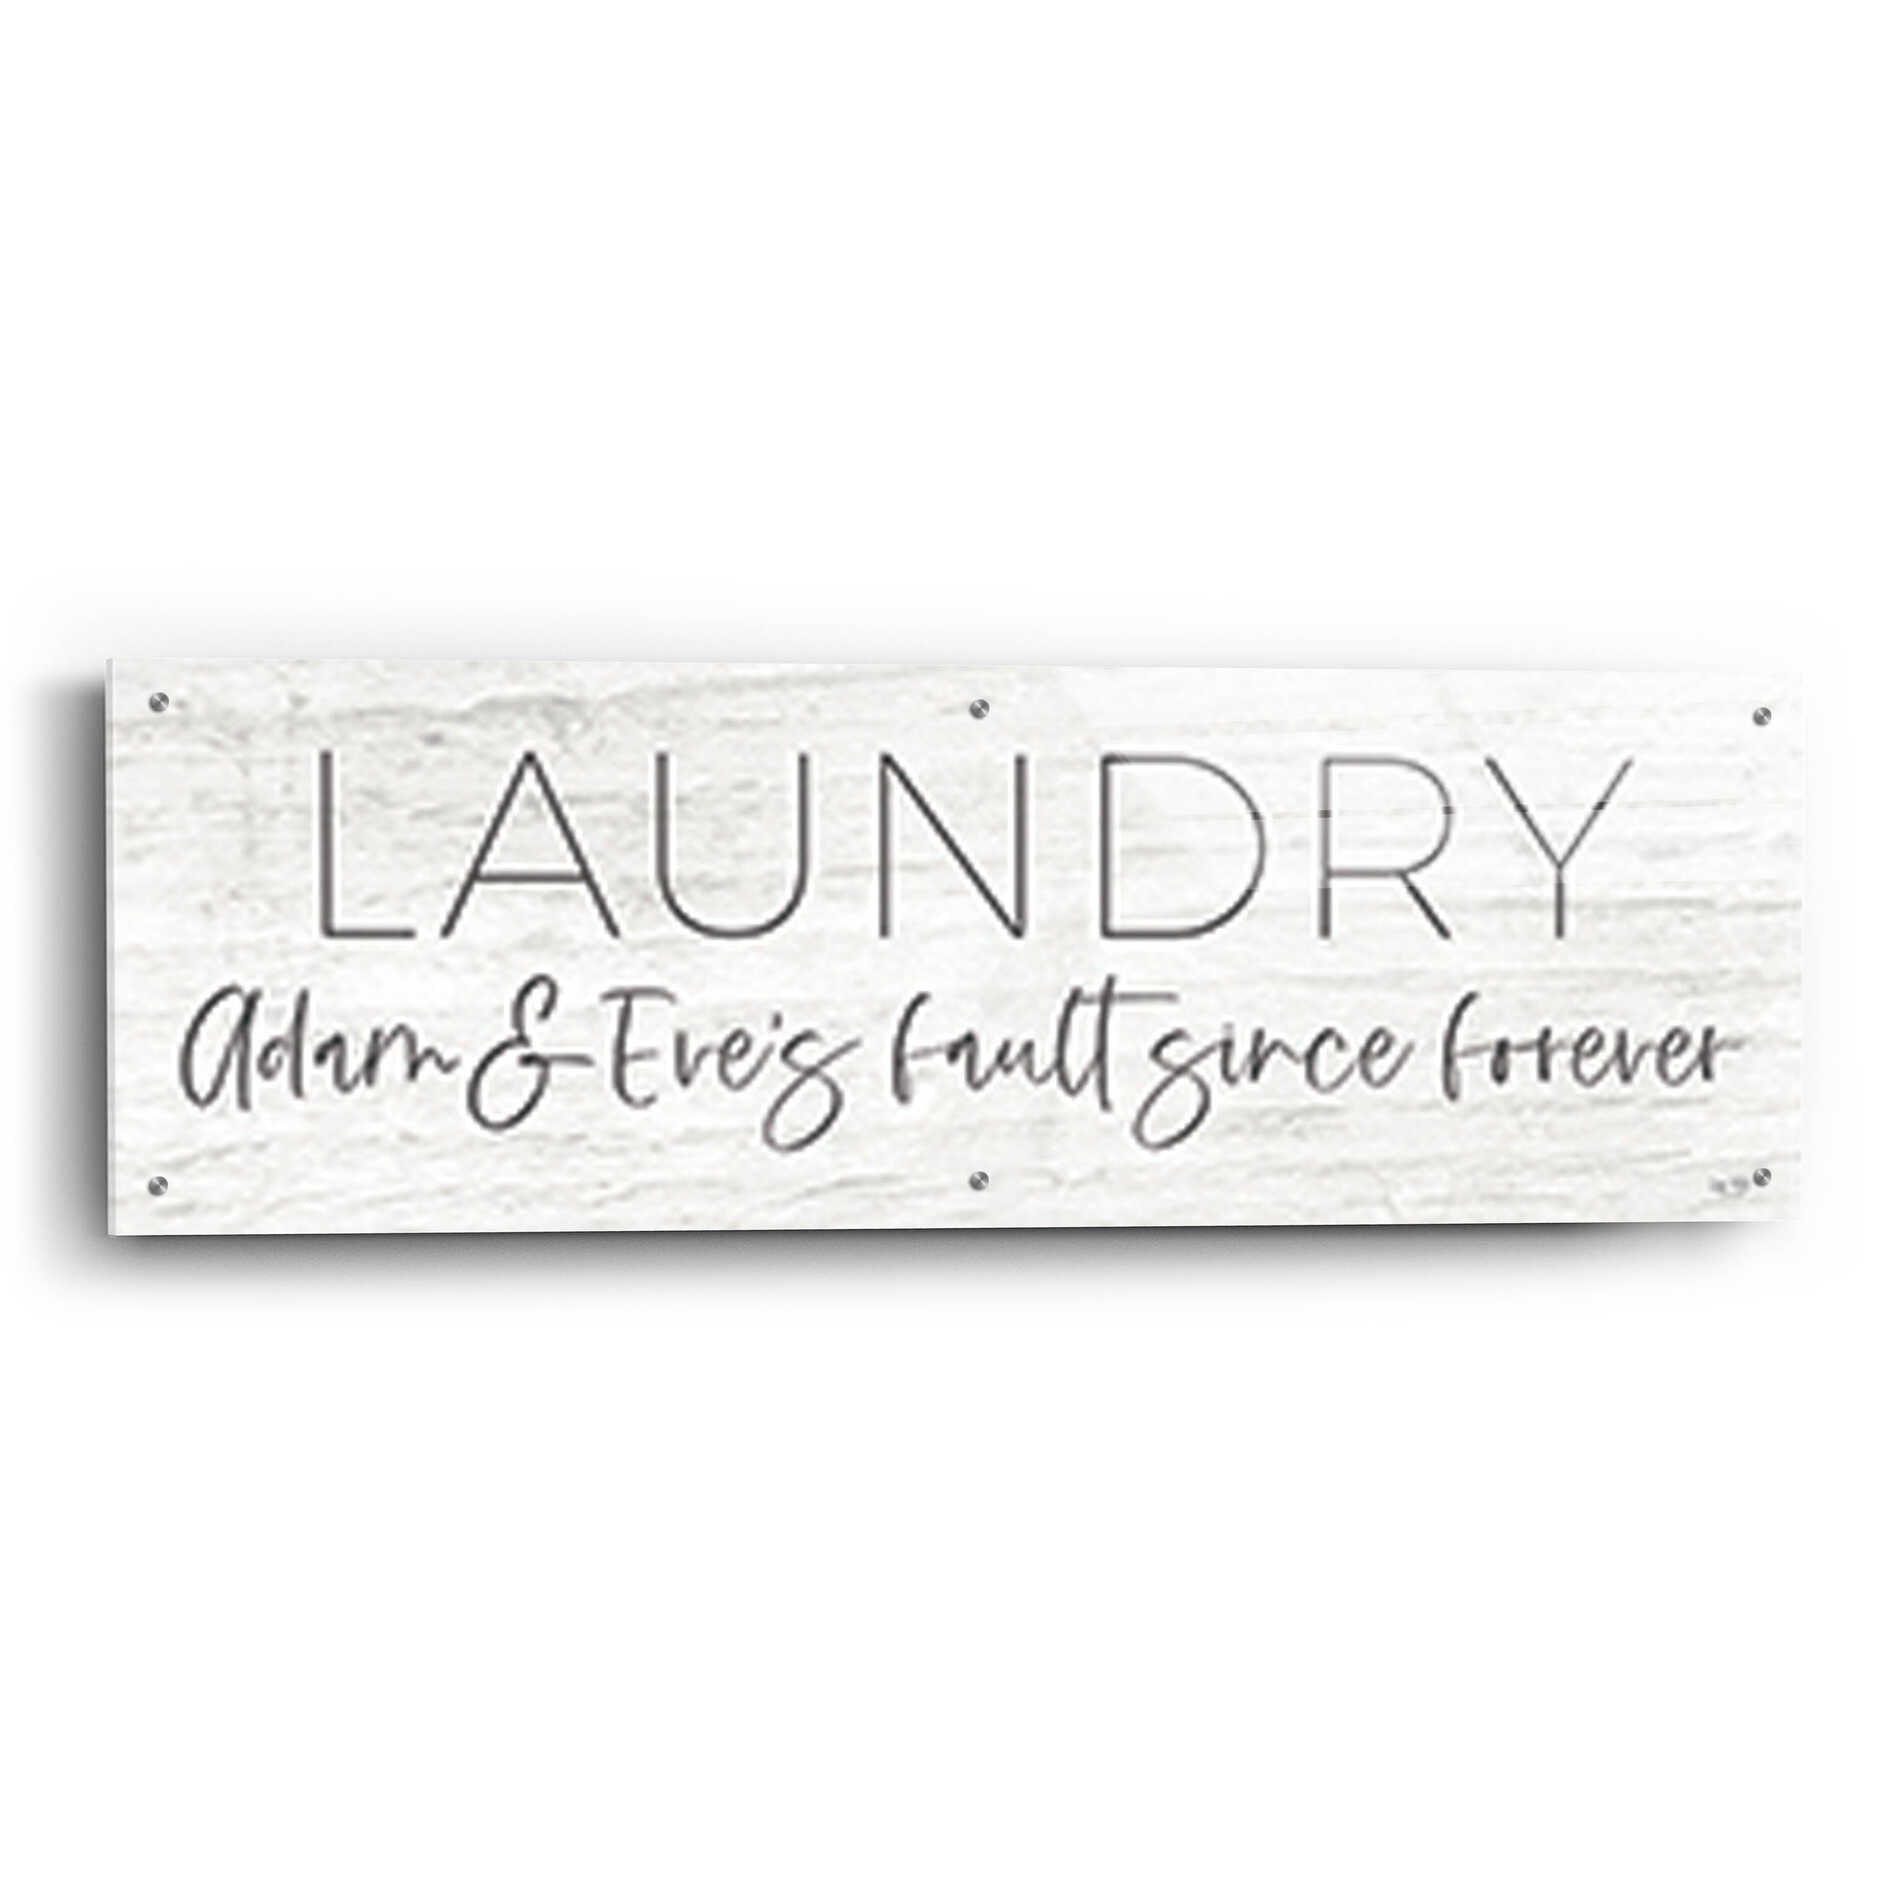 Epic Art 'Laundry - Adam and Eve's Fault Since Forever' by Lux + Me Designs , Acrylic Glass Wall Art,48x16